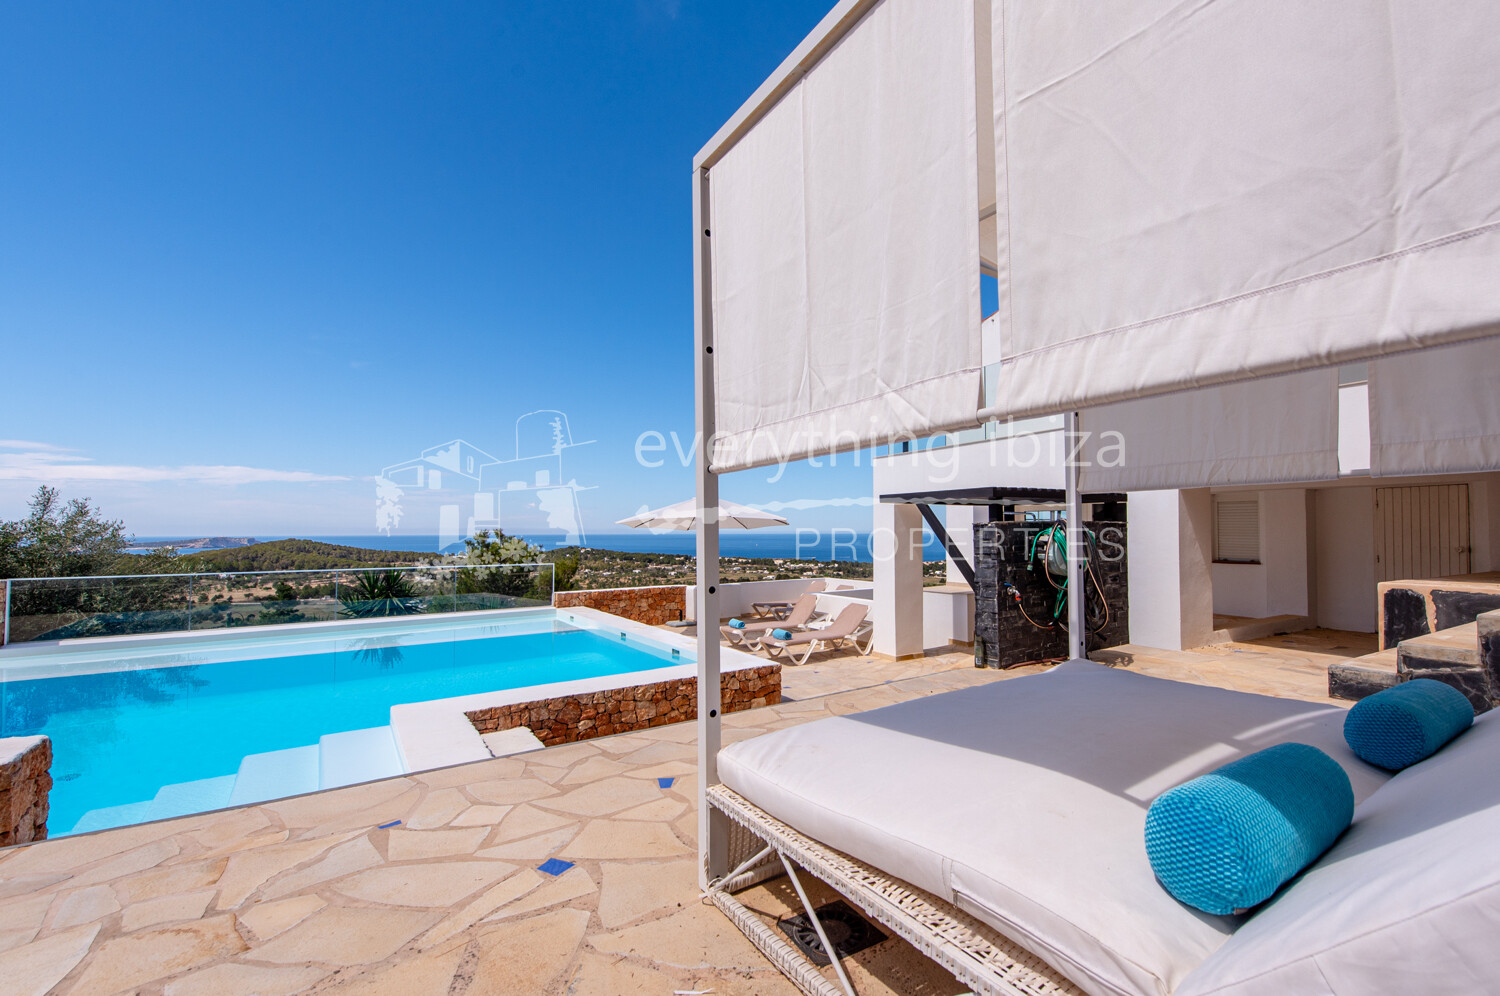 Luxury Elegant Modern Villa with Stunning Views and Close to Beaches, ref. 1708, for sale in Ibiza by everything ibiza Properties